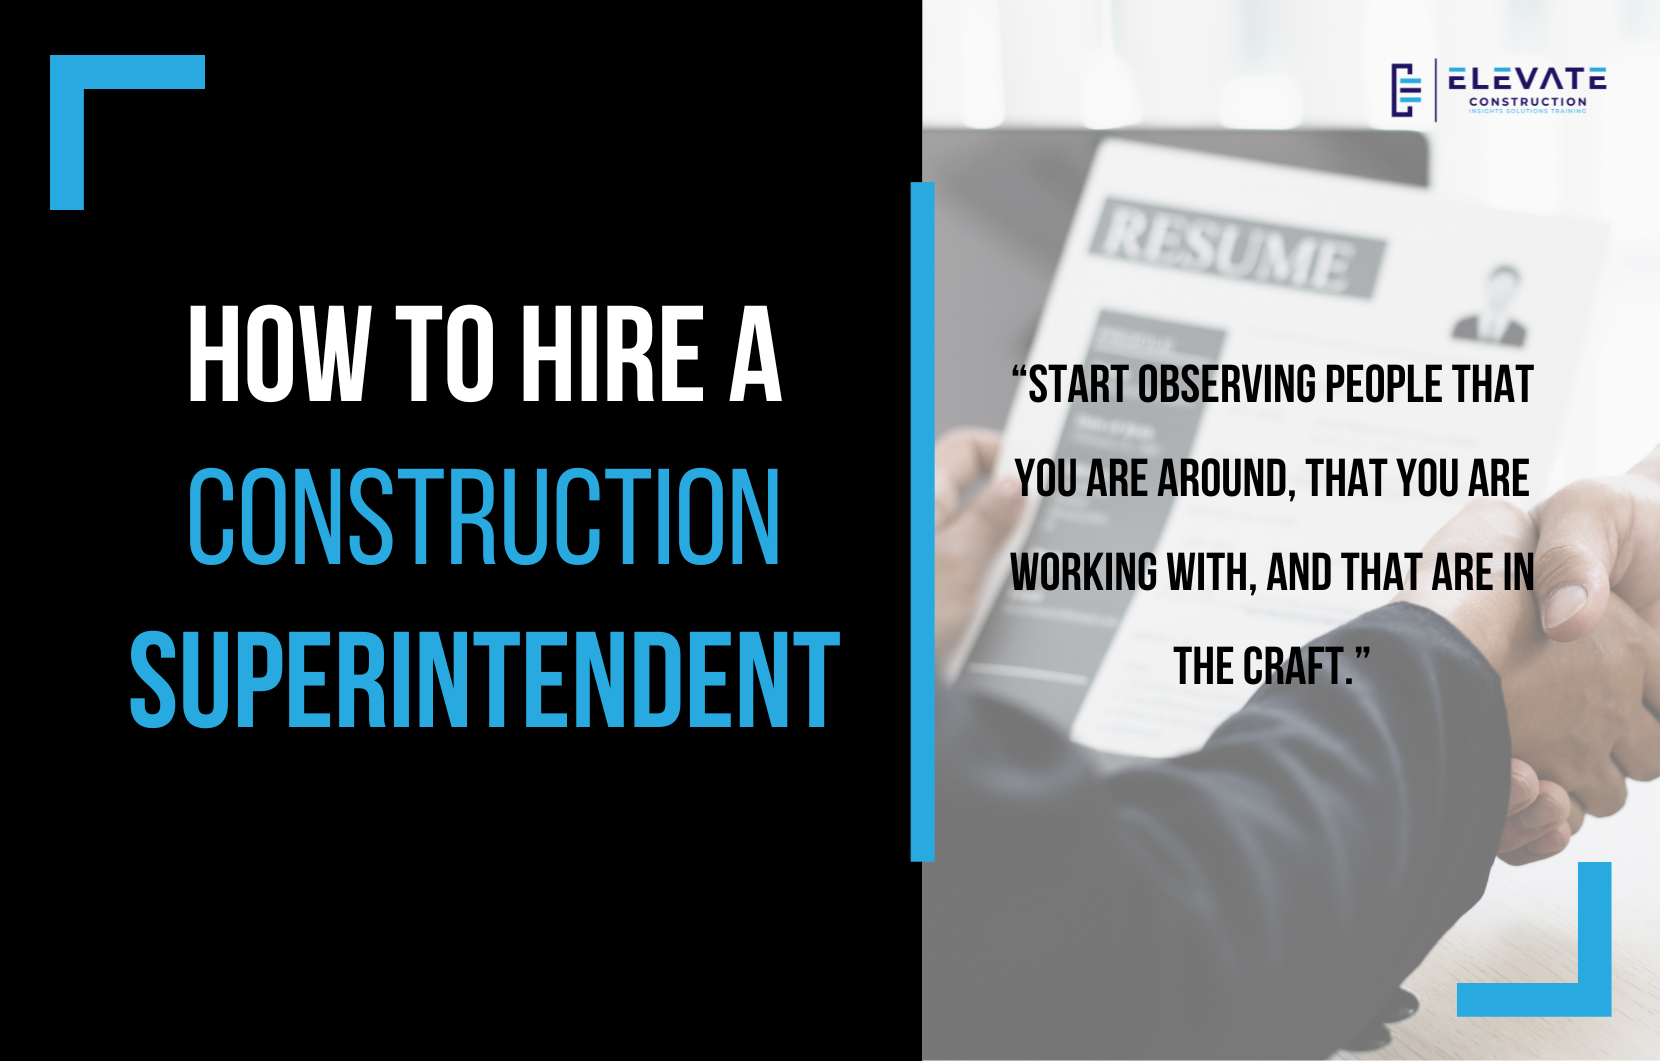 Where To Hire A Construction Superintendent